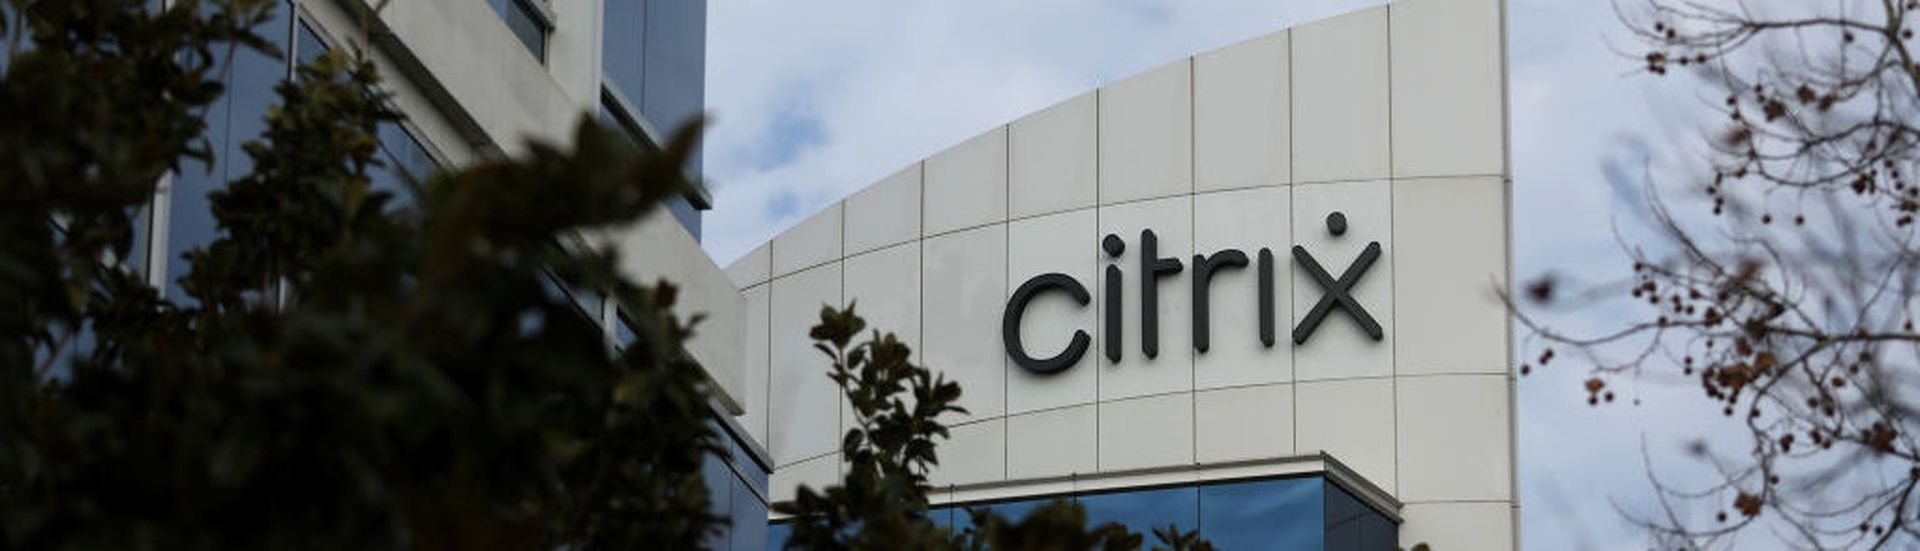 SANTA CLARA, CALIFORNIA &#8211; JANUARY 31: A sign is posted on the exterior of a Citrix office complex on January 31, 2022 in Santa Clara, California. Cloud-computing company Citrix announced plans to be acquired by Elliot and Vista Equity Partners in an all-cash deal valued at $16.5 billion. (Photo by Justin Sullivan/Getty Images)